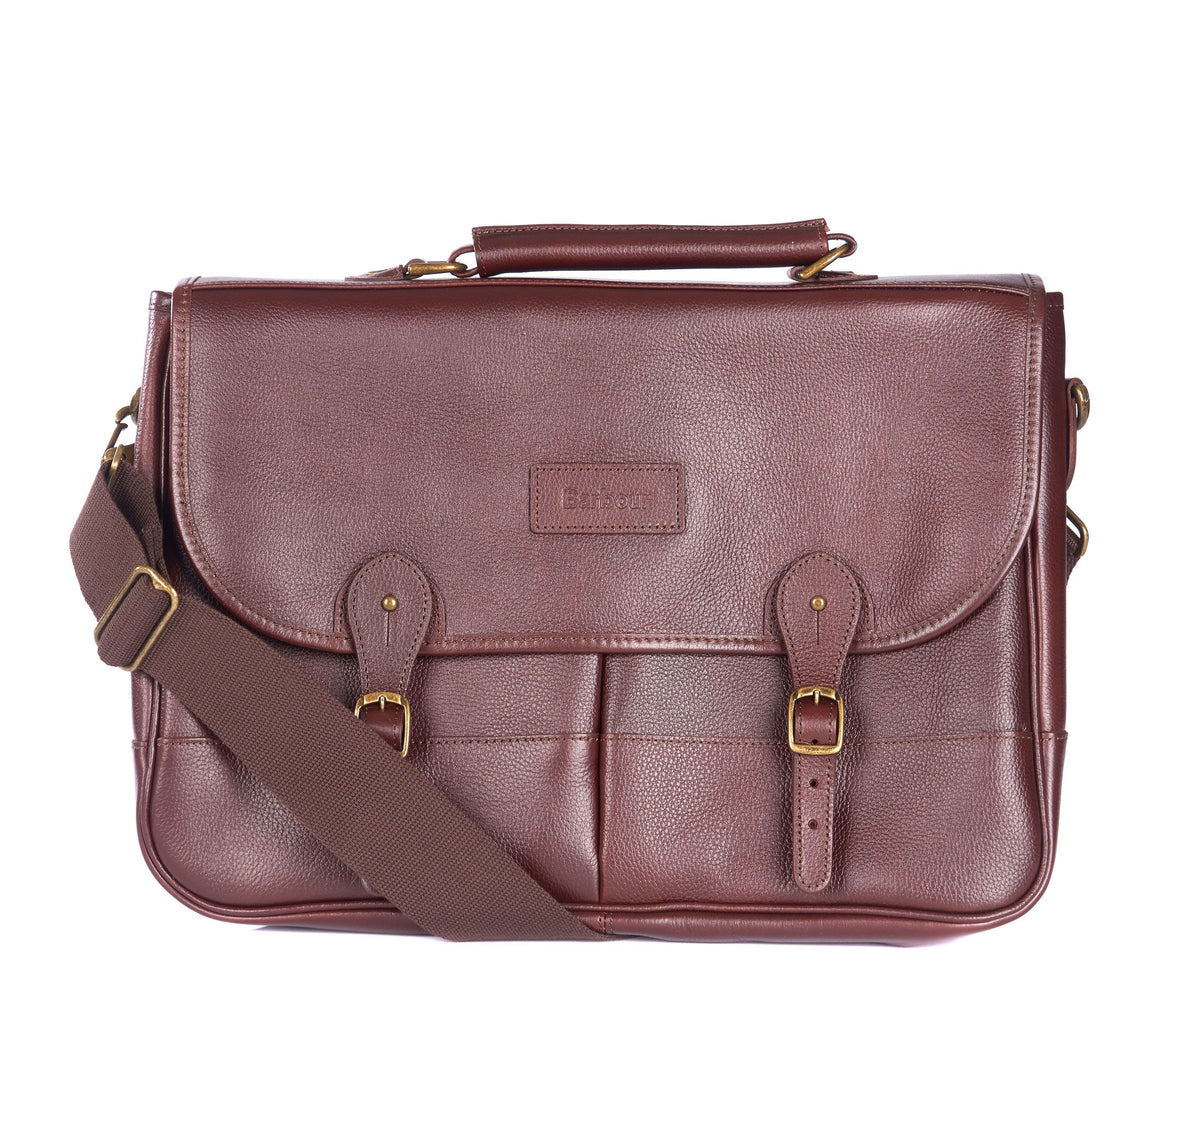 Barbour Leather Briefcase, 01, Uba0011, Dk Brown